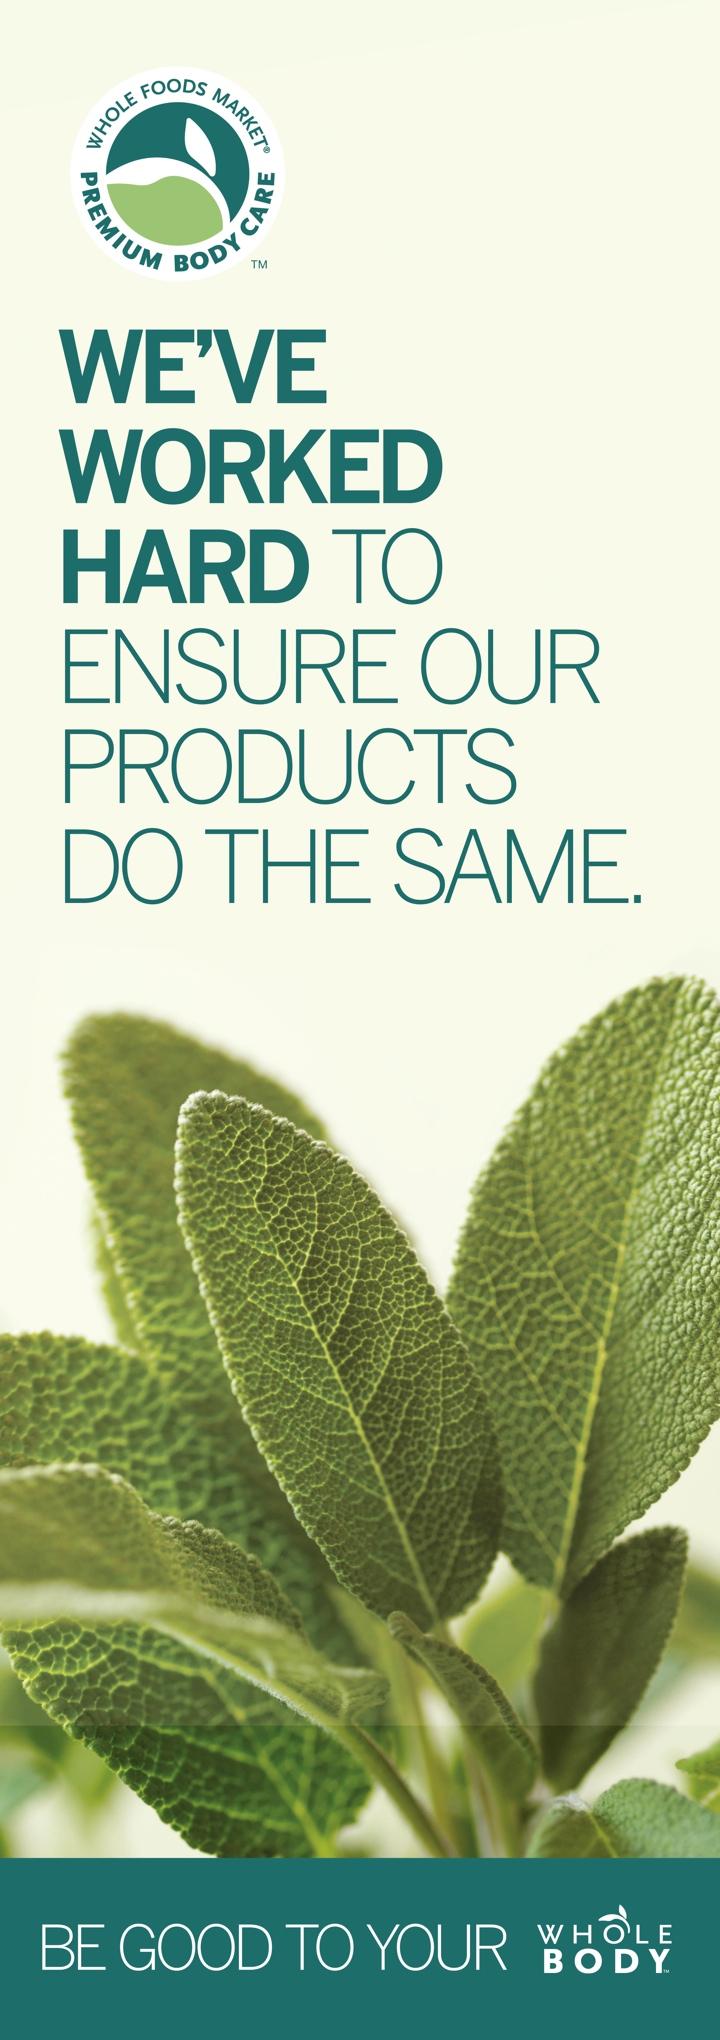 WFM Body Care Quality Standards Already the HIGHEST IN THE INDUSTRY. We CAREFULLY EVALUATE each and every product we sell. All personal care products must meet our CURRENT BODY CARE QS LIST.